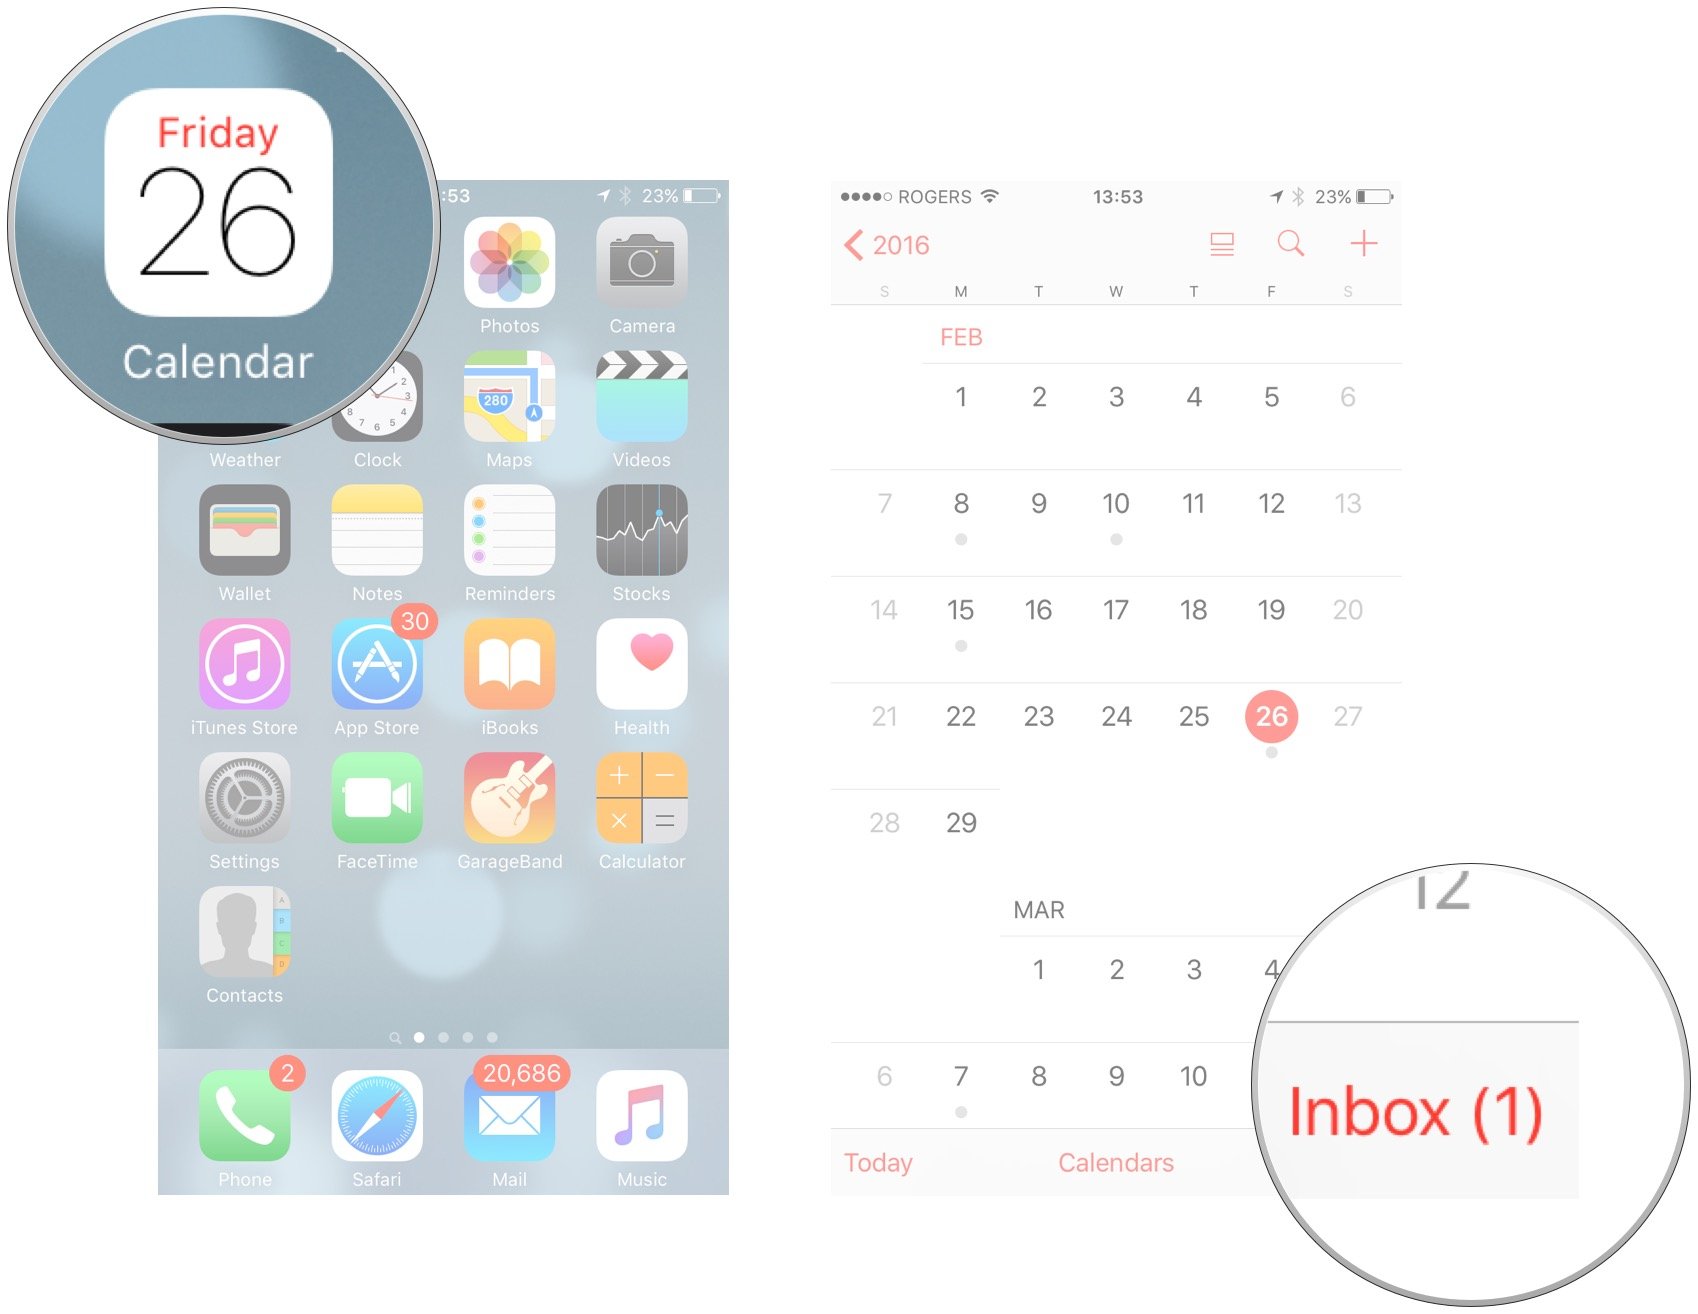 Manage all shared calendar events in Calendar on iPhone and iPad by showing: Open calendar app the tap inbox